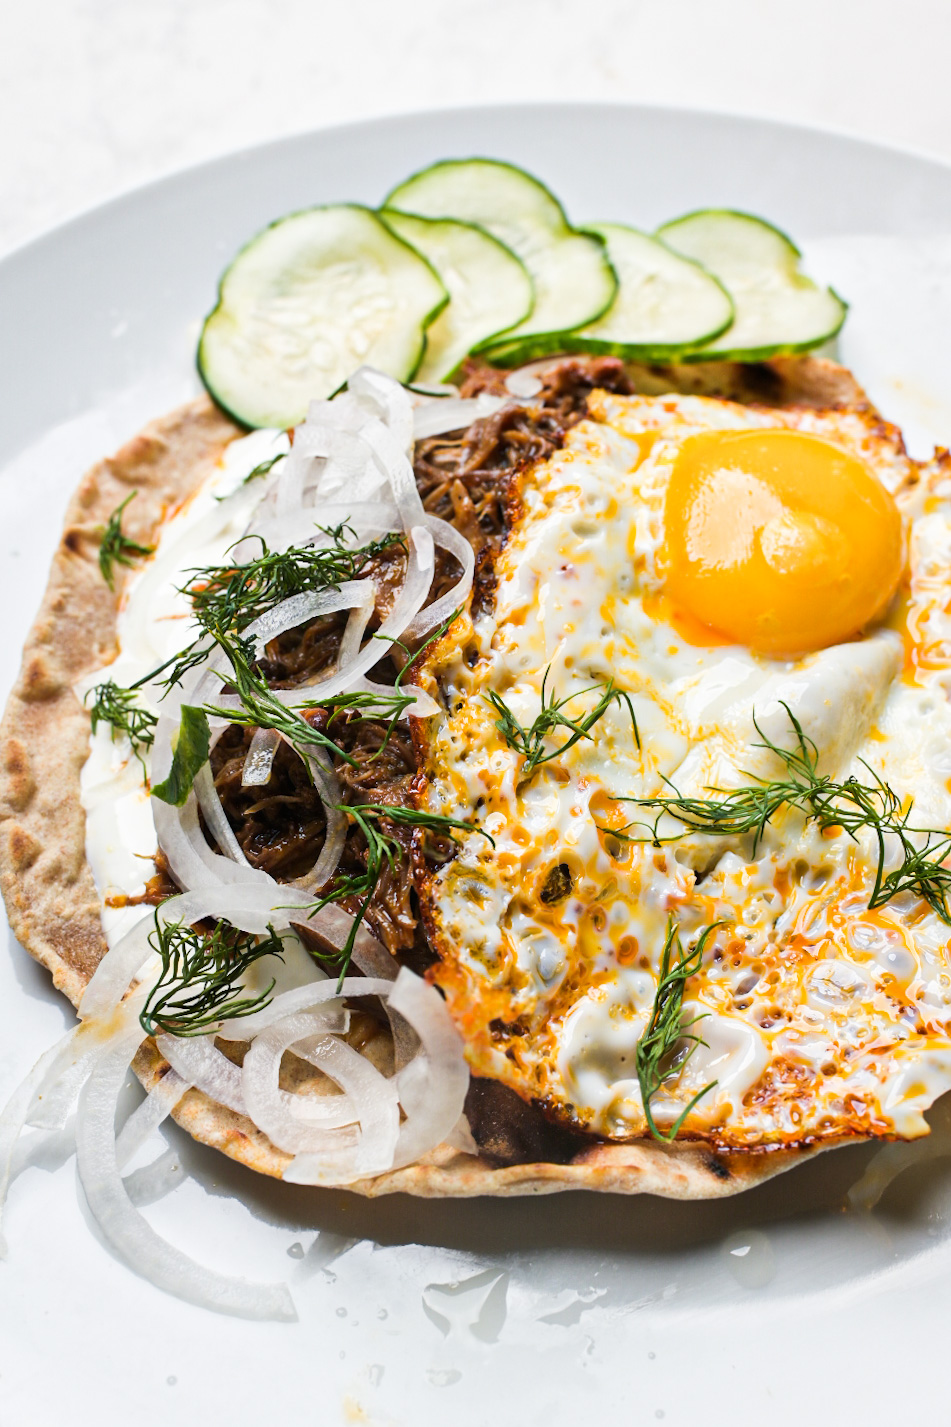 Braised lamb neck roti with a chili oil fried egg